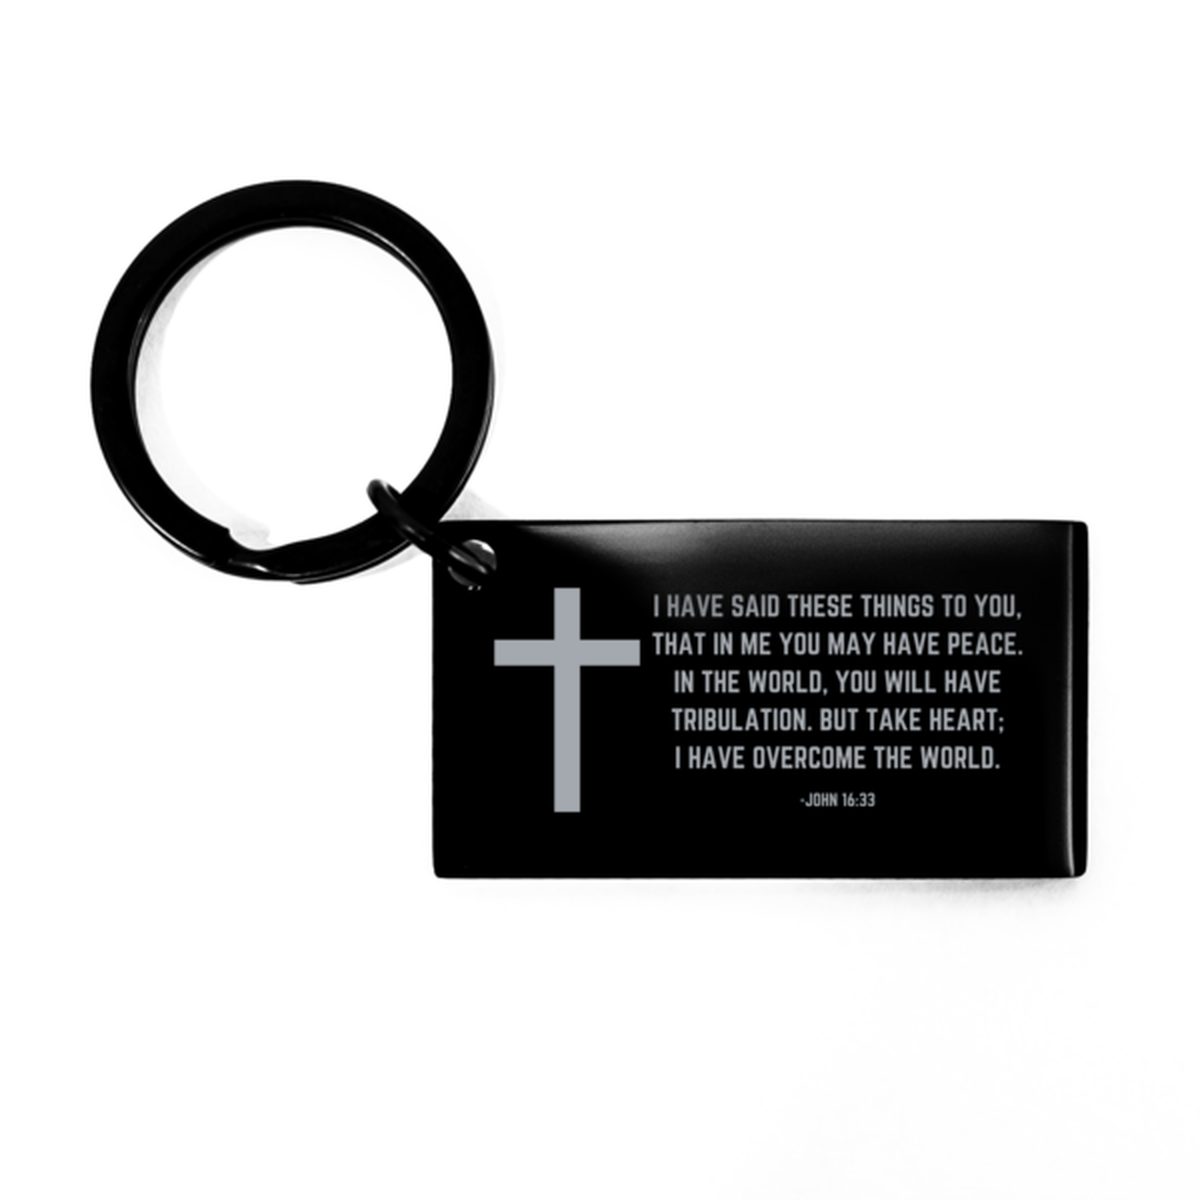 Baptism Gifts For Teenage Boys Girls, Christian Bible Verse Black Keychain, I have said these things, Confirmation Gifts, Bible Verse Keyring for Son, Godson, Grandson, Nephew